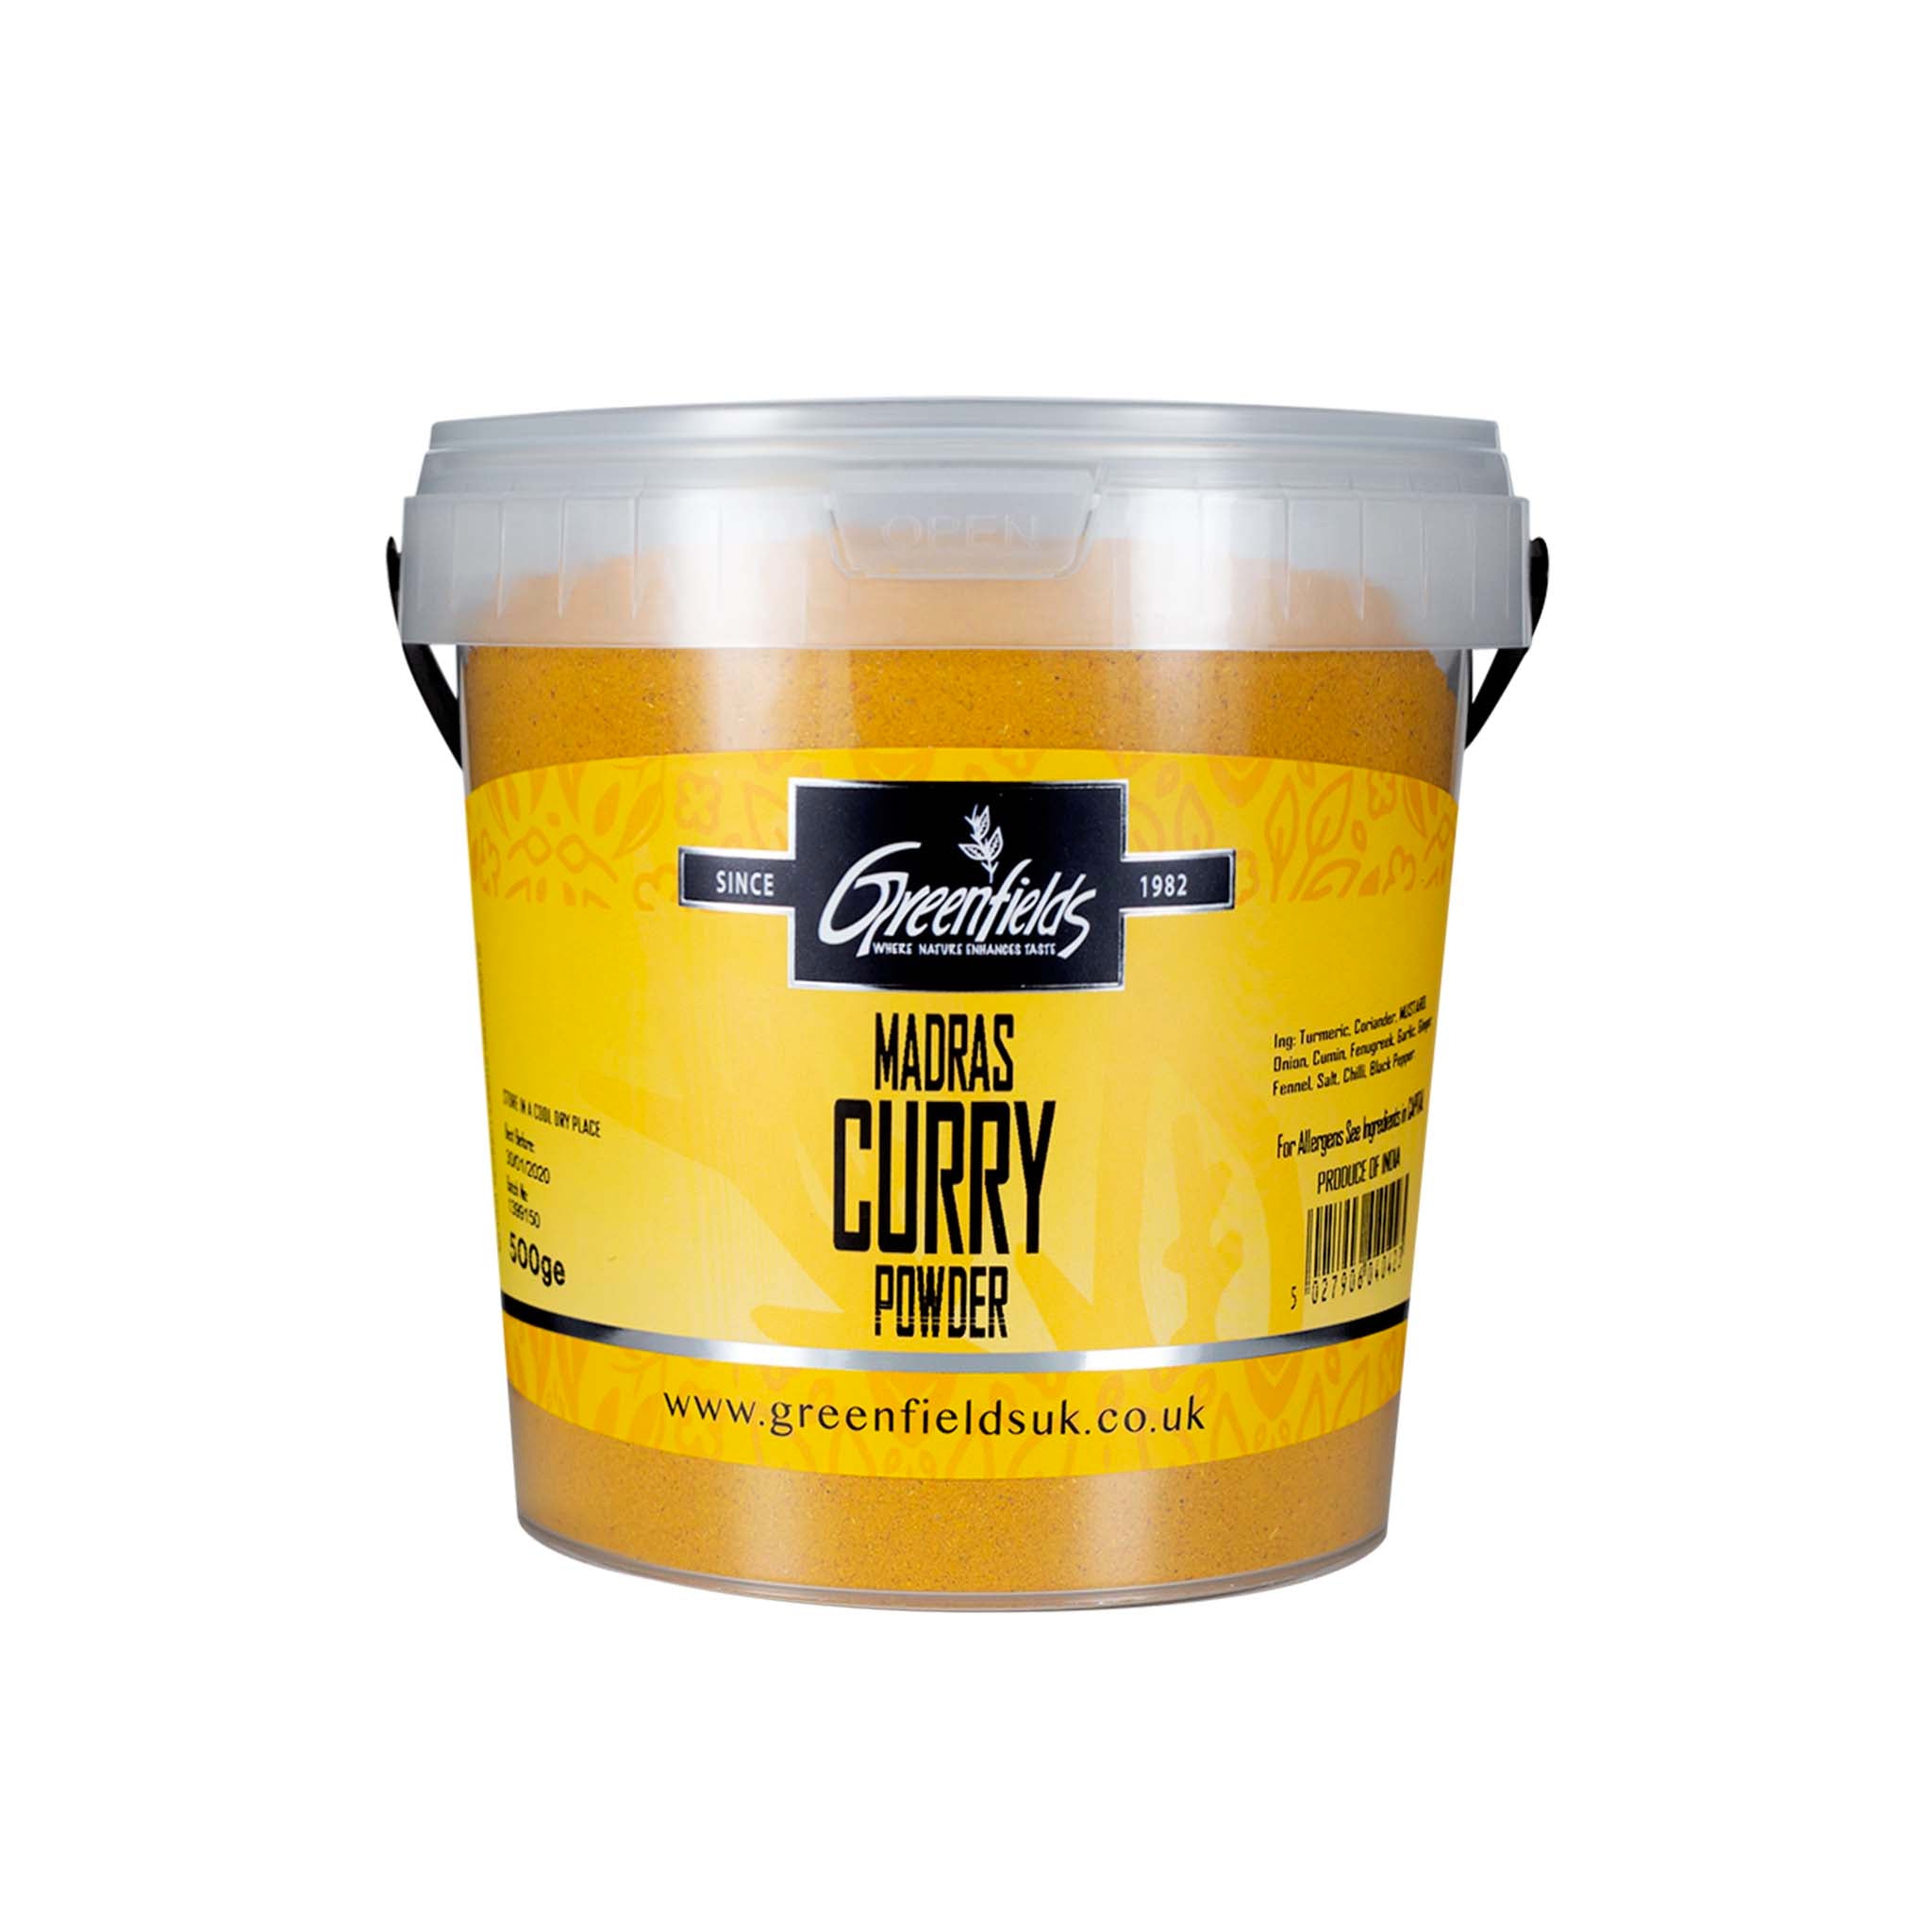 Greenfields Curry Powder Madras Catering Size Ingredients Herbs & Spices Catering Size Herbs & Spices